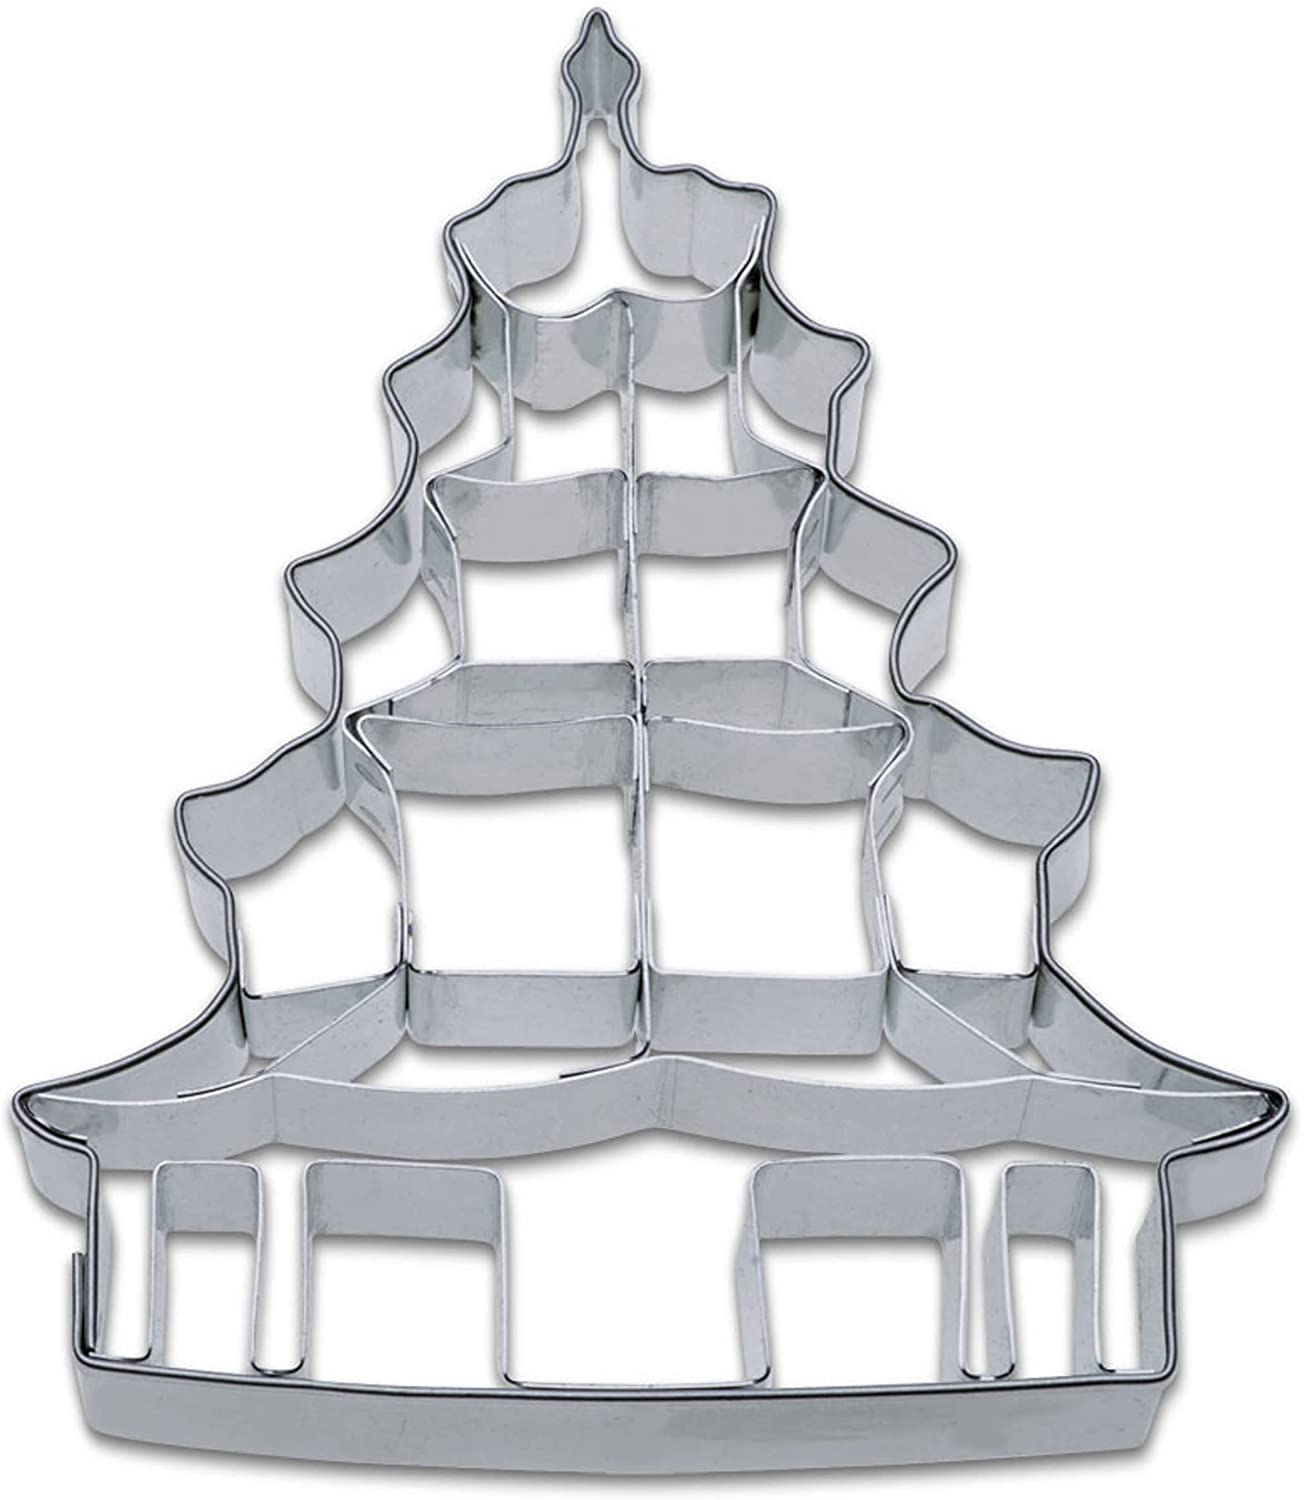 Staedter Städter 199736 Chinese Tower Cookie Cutter, Stainless Steel